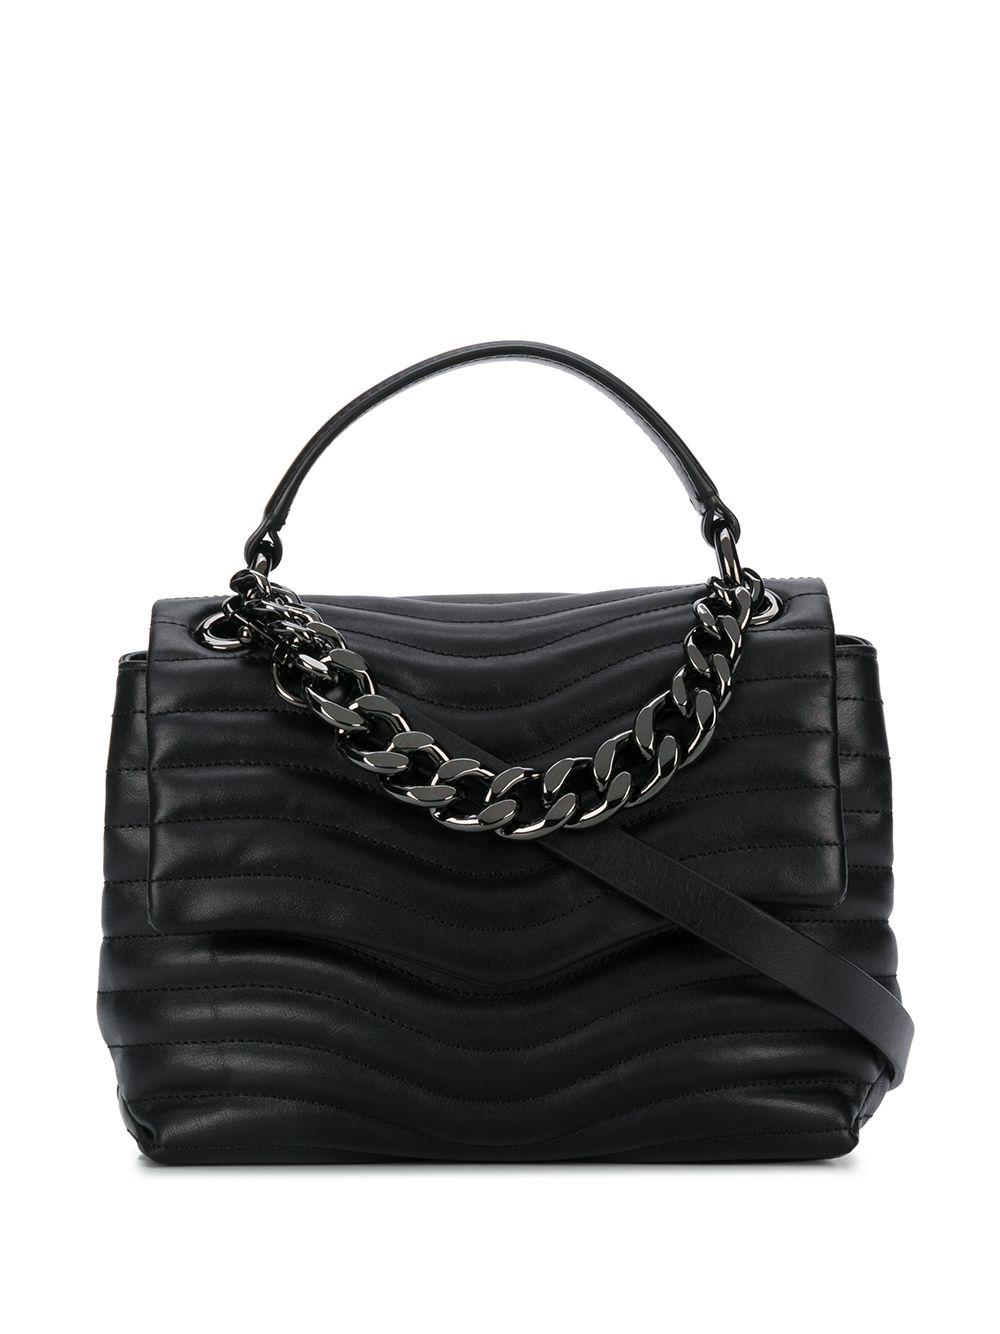 Rebecca Minkoff Leather Quilted Chain Detail Handbag in Black - Lyst